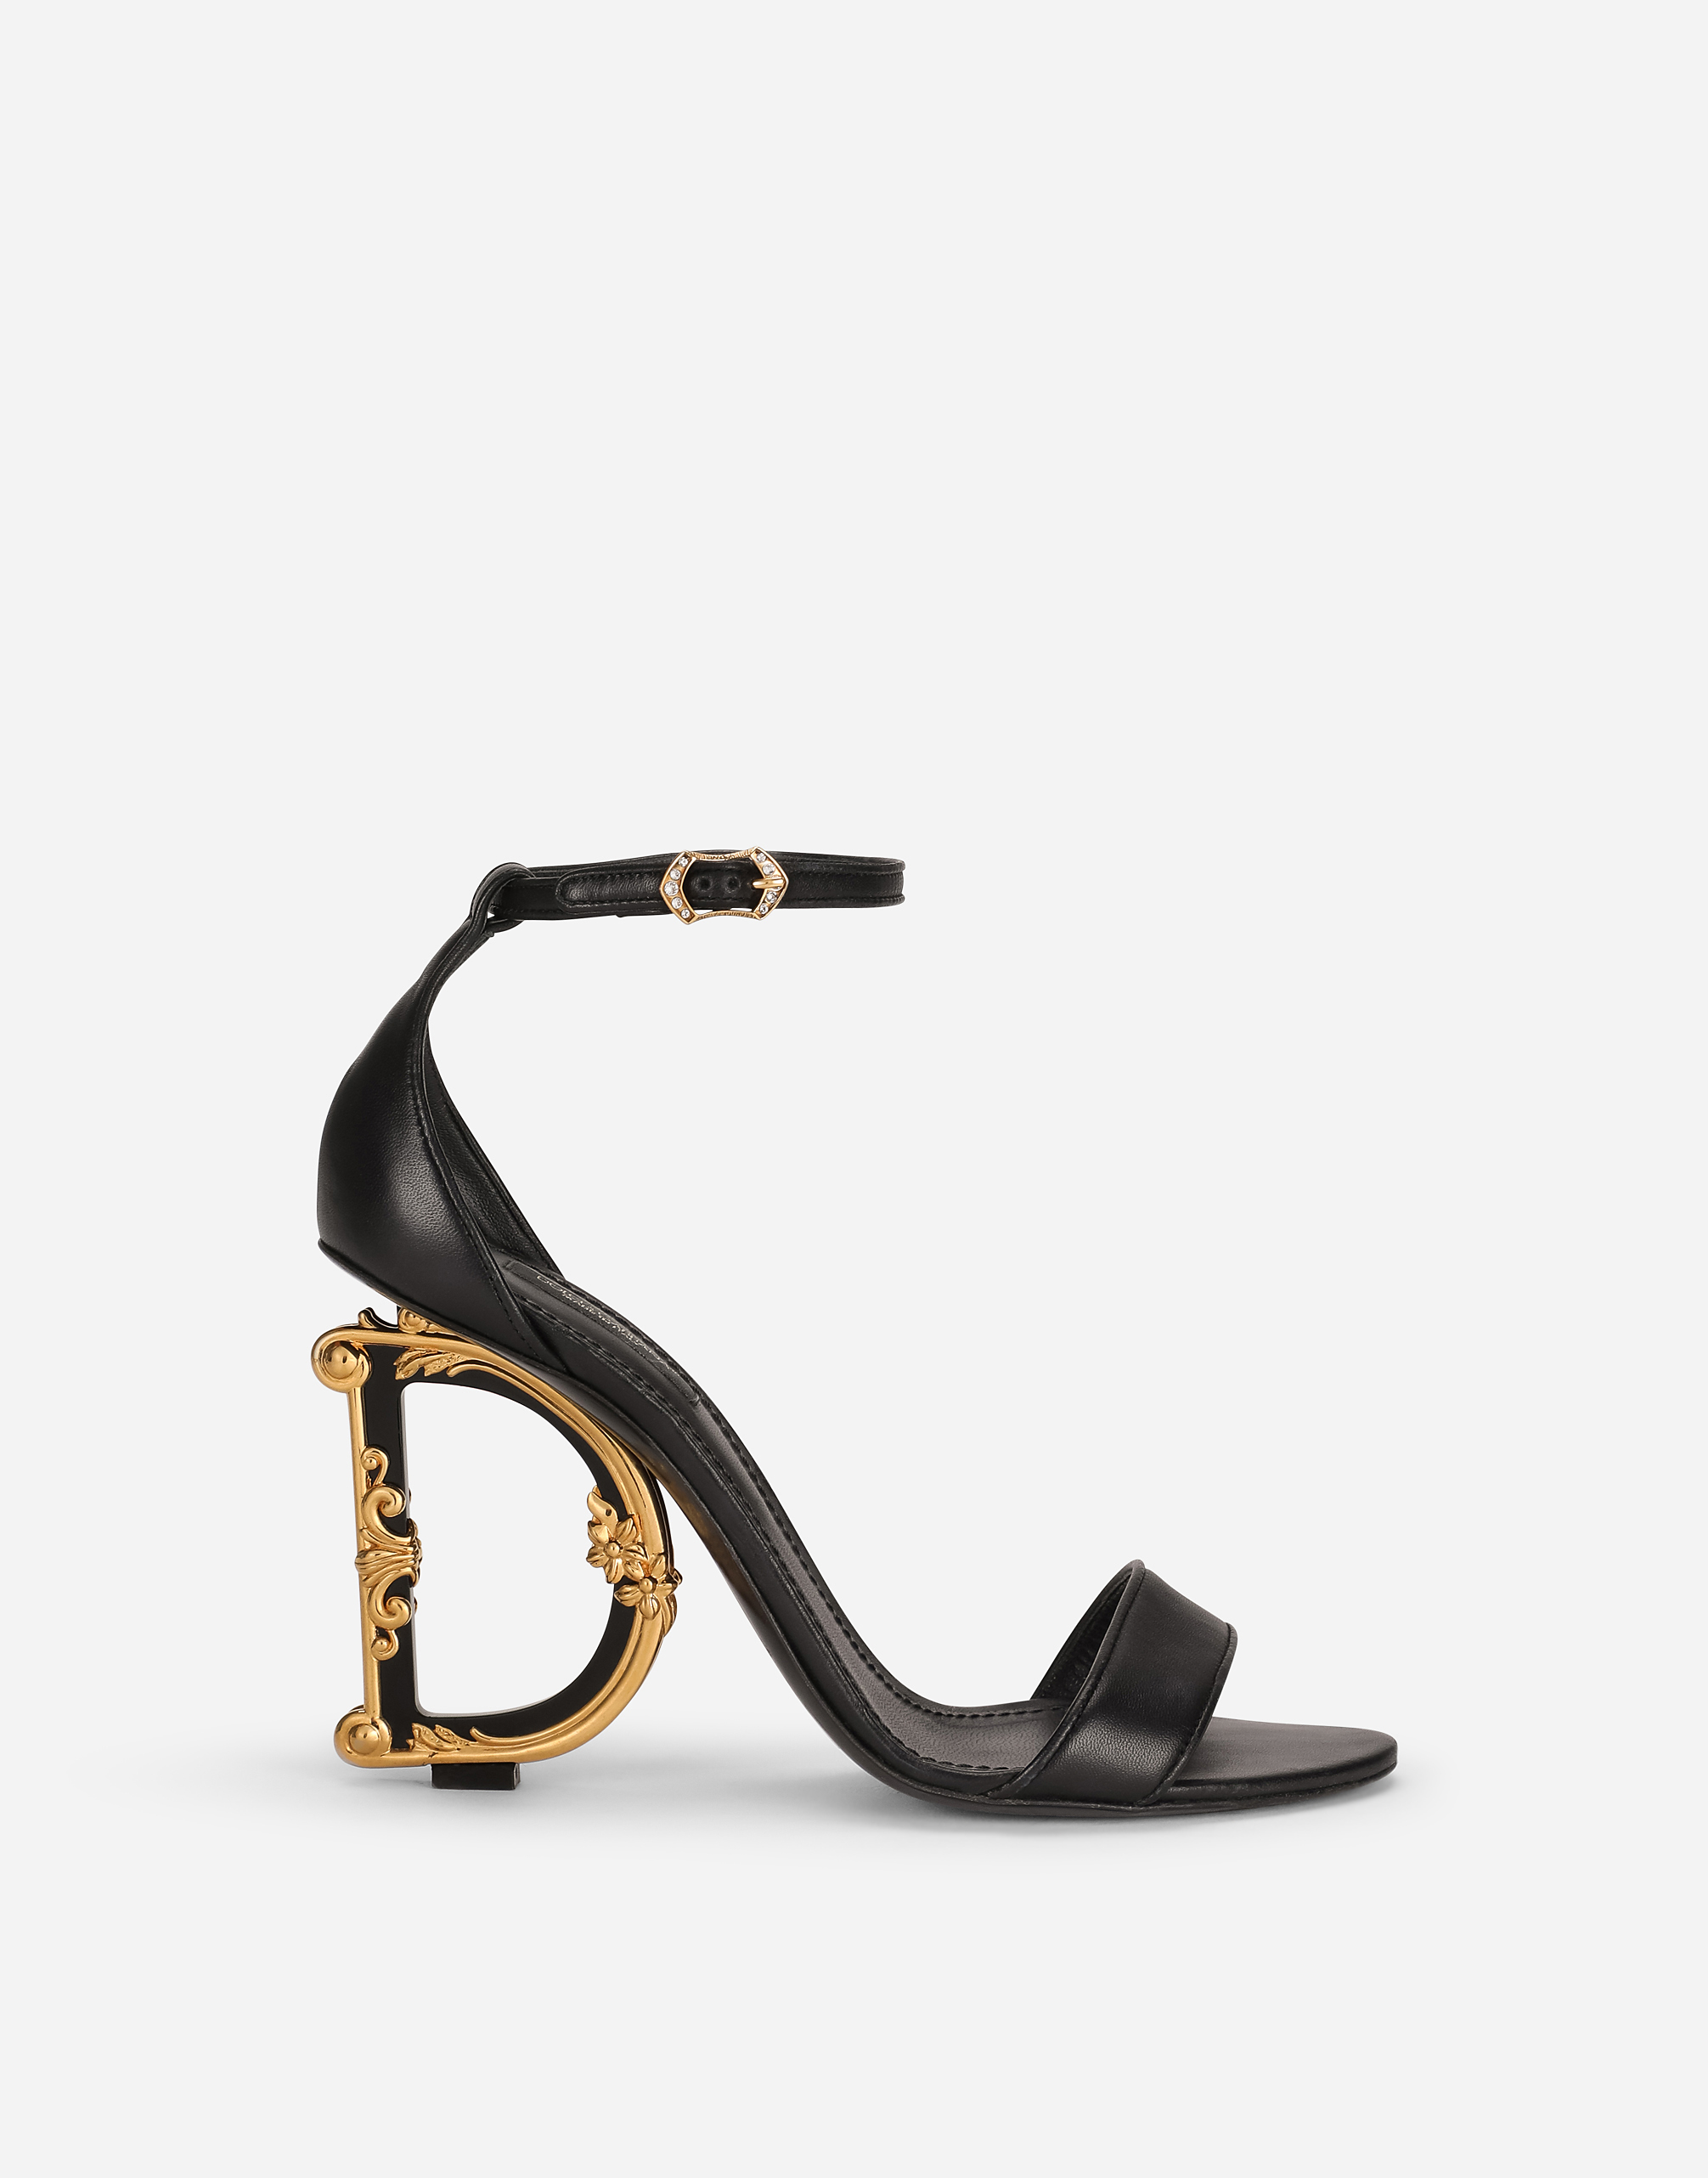 Nappa leather sandals with baroque DG detail in Black for Women | Dolce&Gabbana®